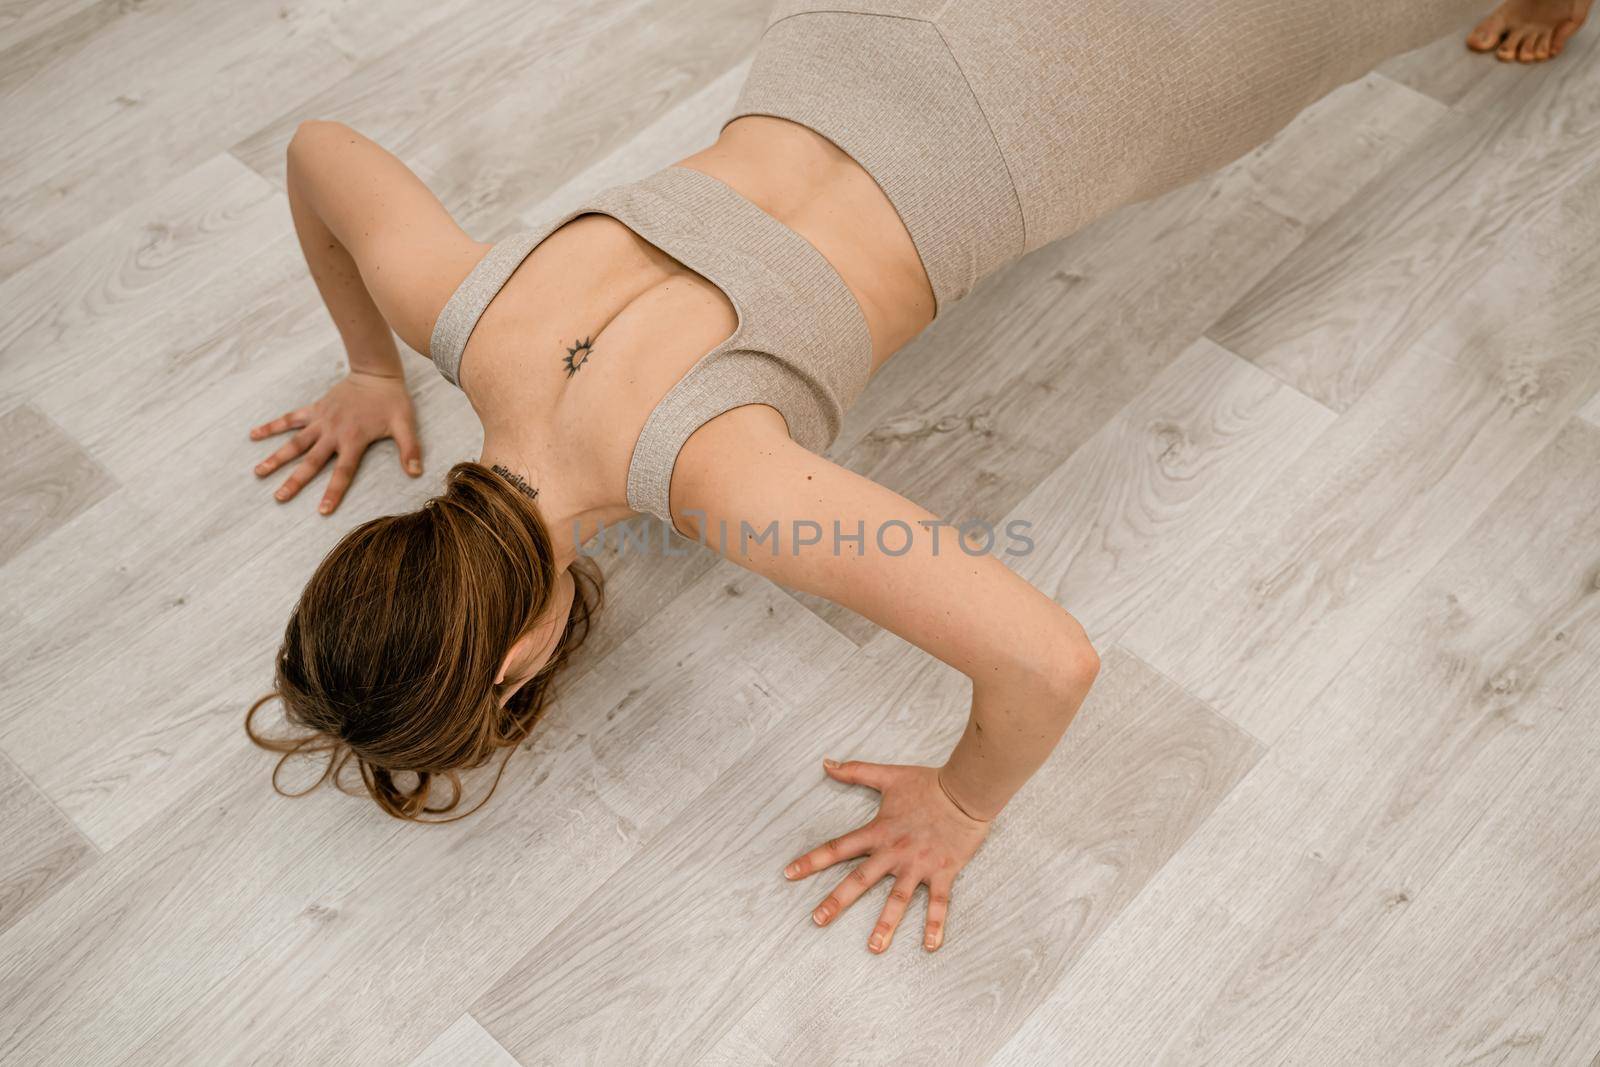 Top view of a muscular woman during push-ups. She is wearing a beige top and leggings, with a round tattoo between her shoulder blades. The concept of a healthy lifestyle